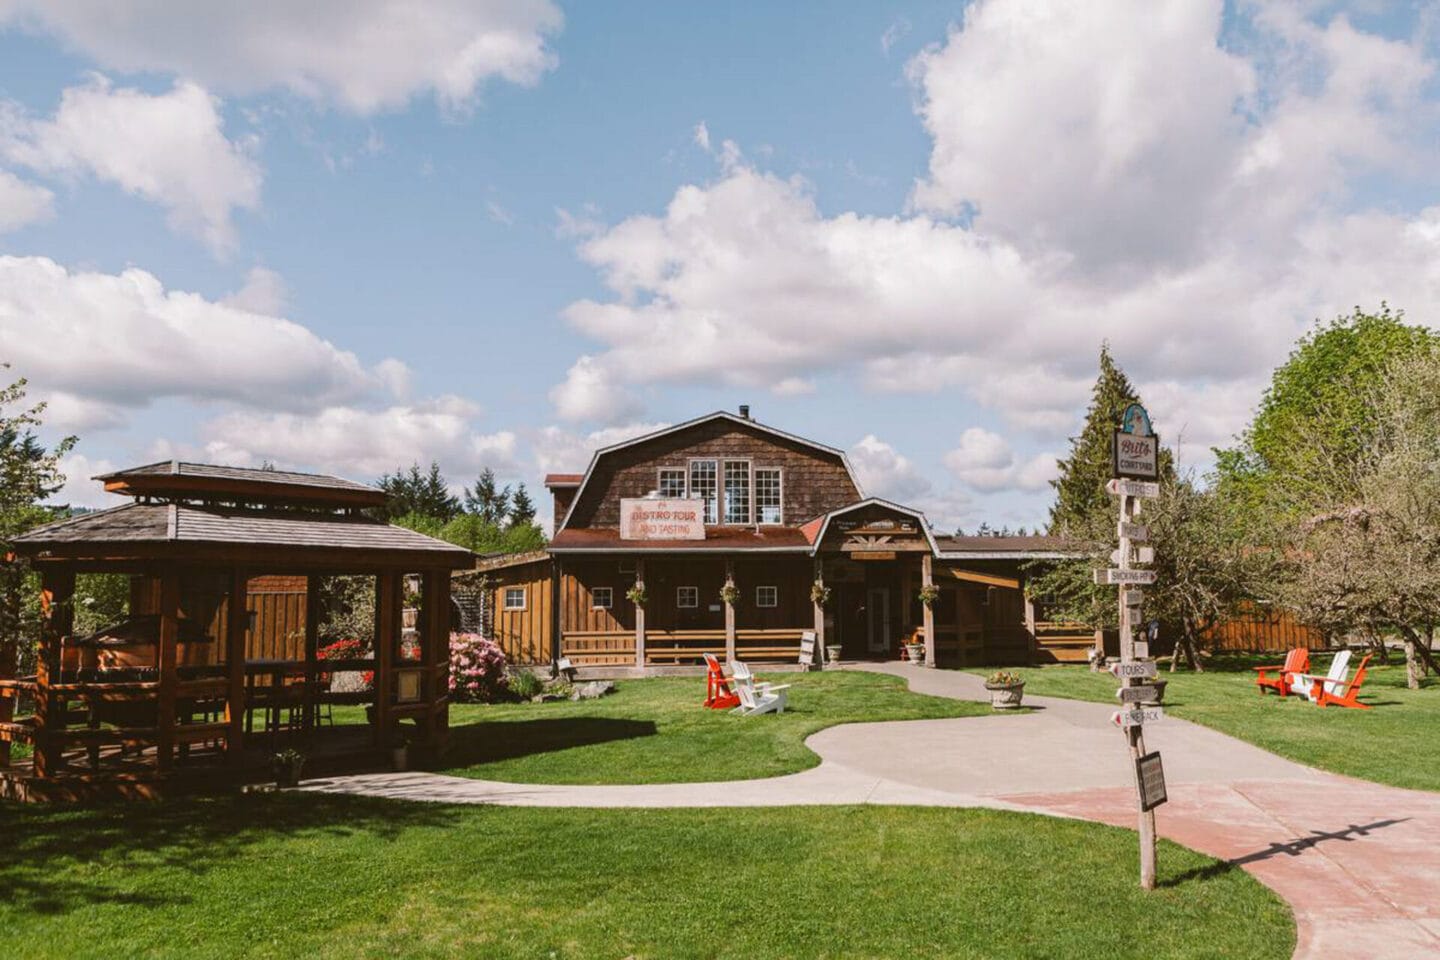 Merridale Cidery and Distillery in Cowichan Valley